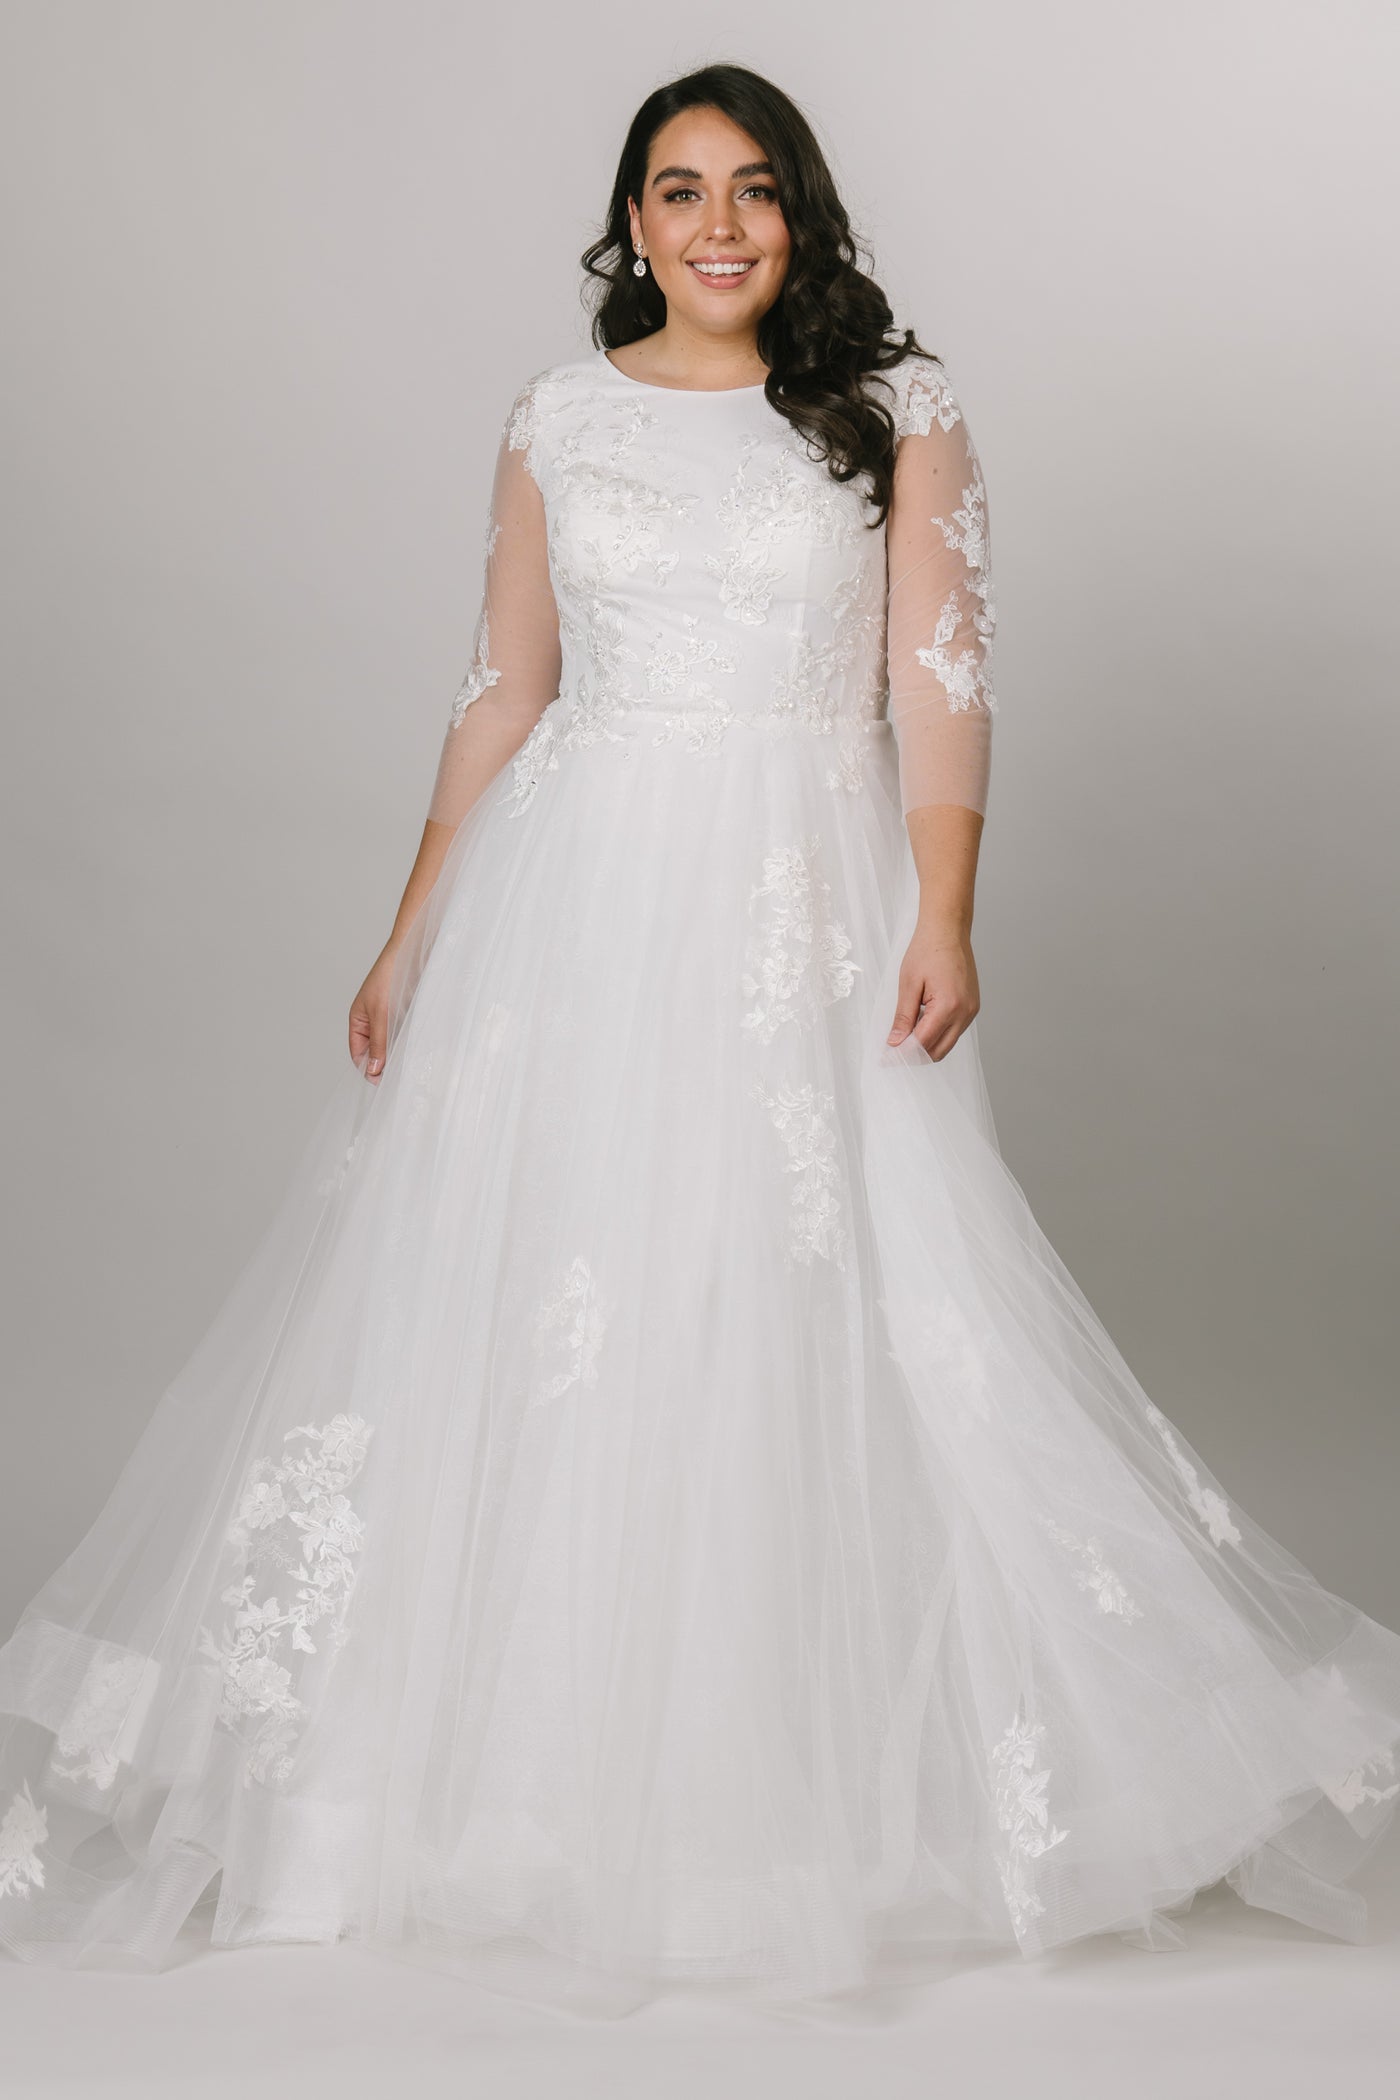 In a white color this modest wedding dress is the whimsical gown of our dreams! With a soft lace print under the top layer of appliques, mesh sleeves, and a scoop neck, you'll be dancing the night away. 